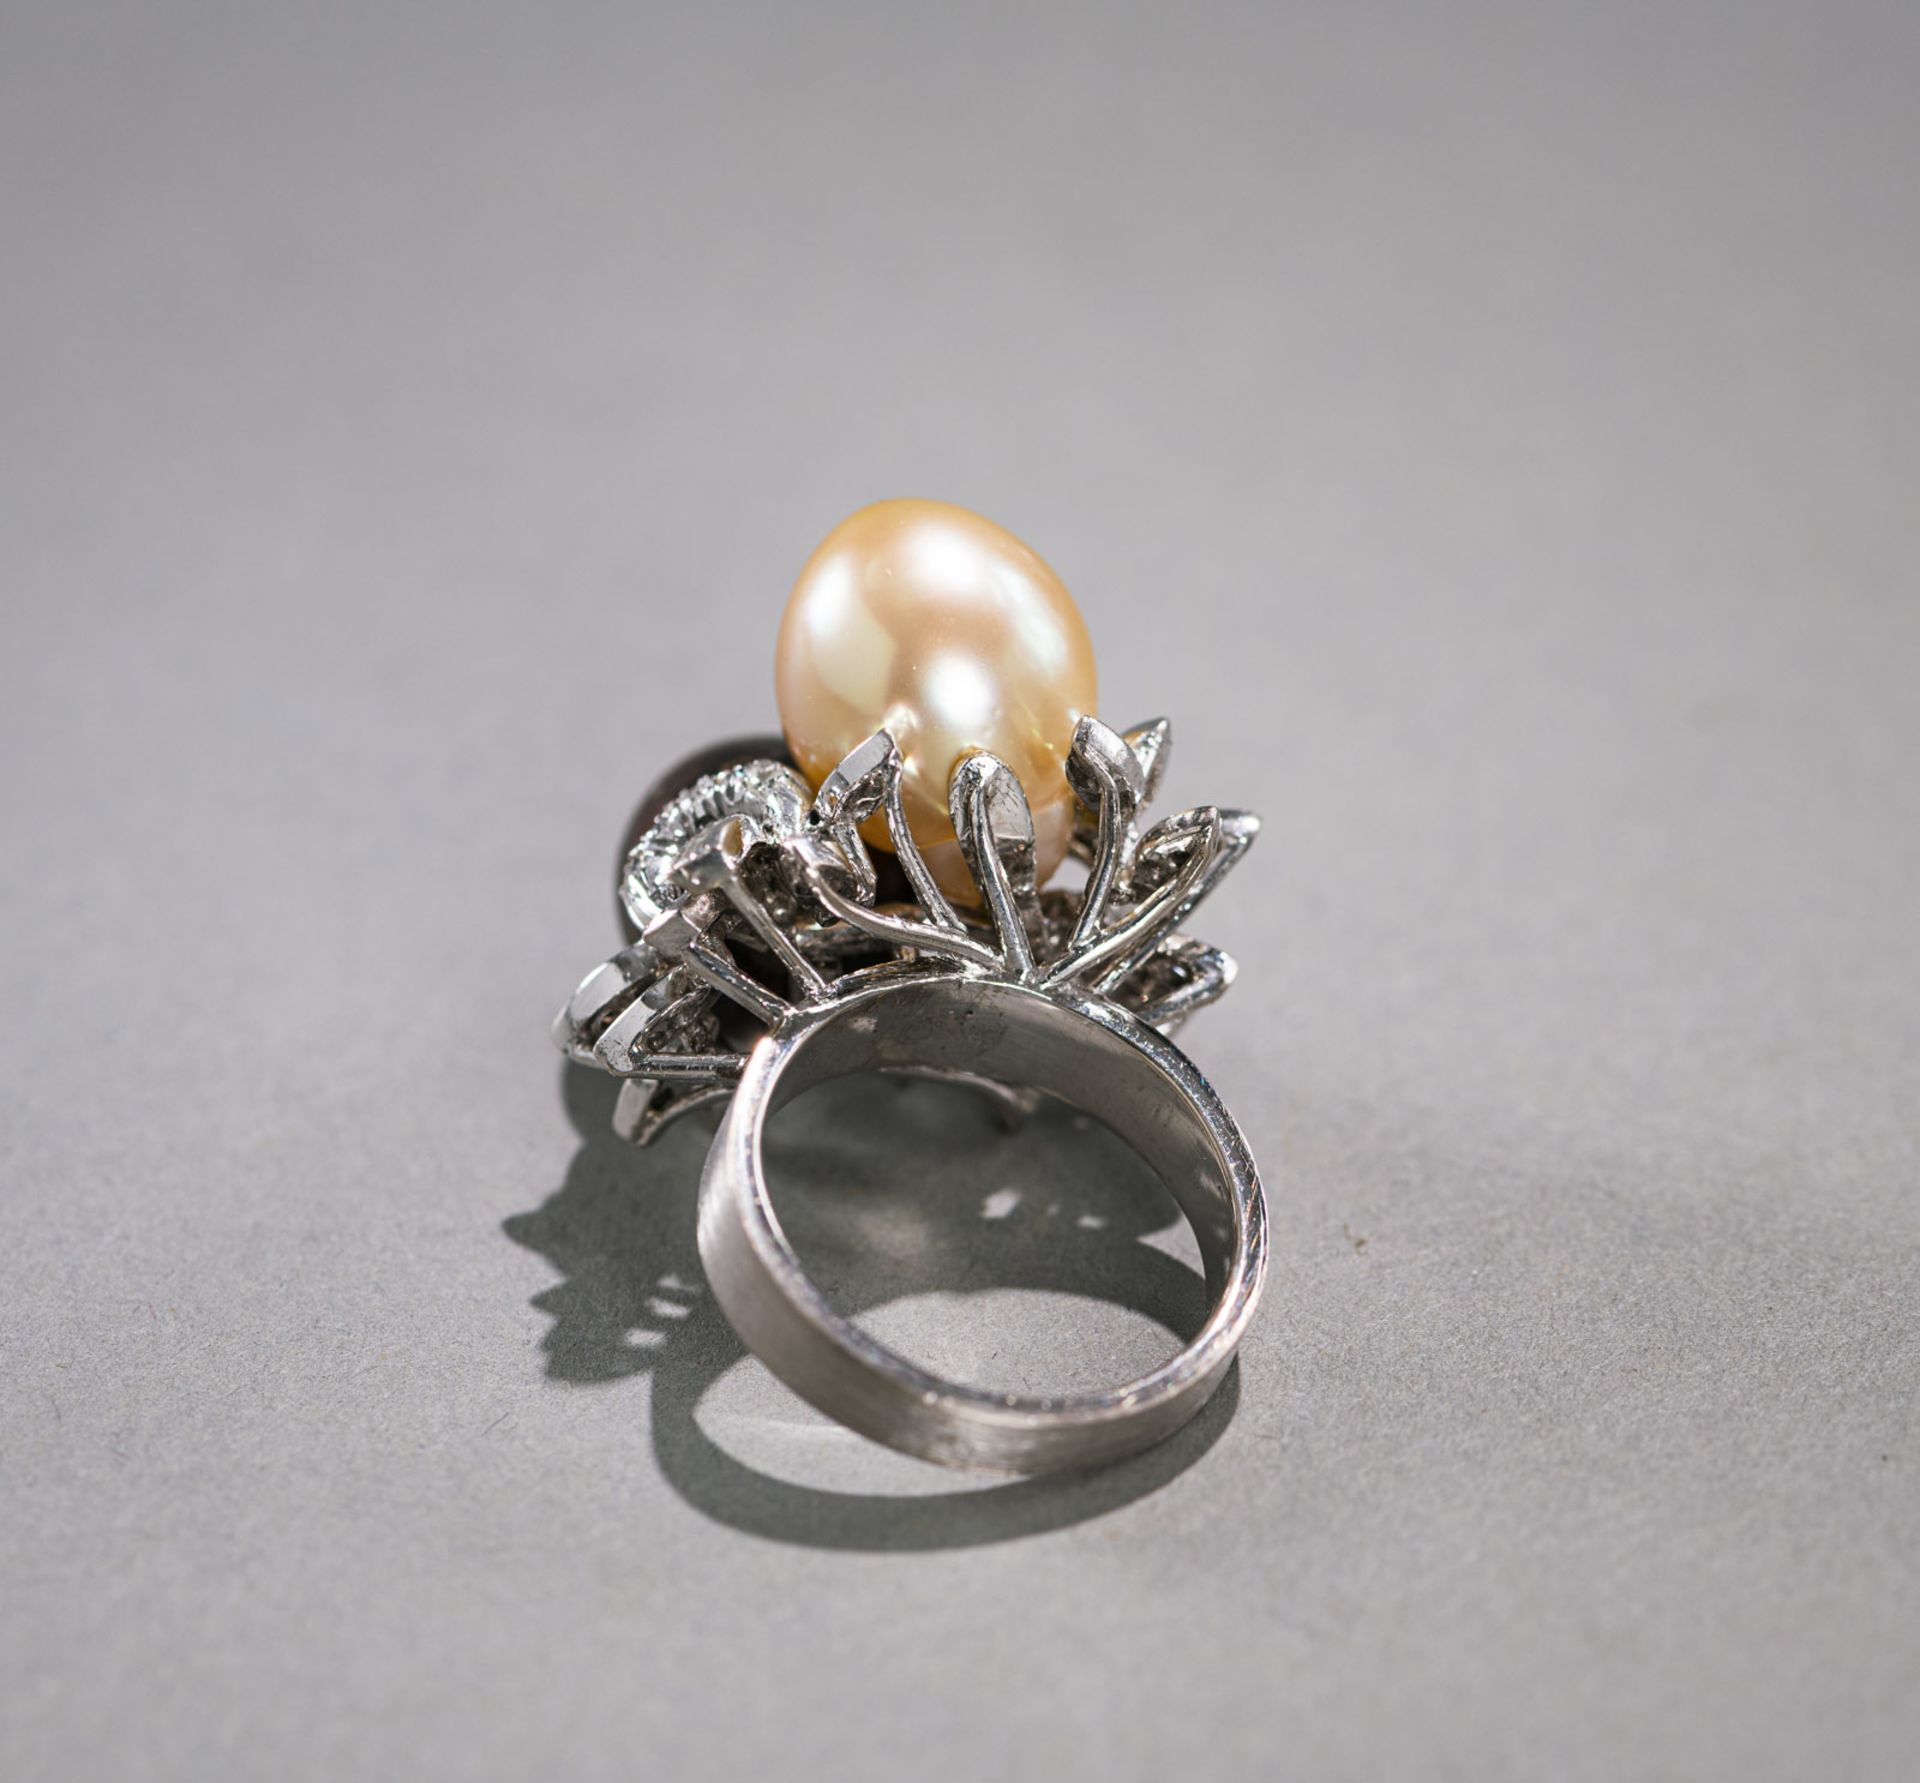 A DECORATIVE PEARL AND DIAMOND RING - Image 5 of 6